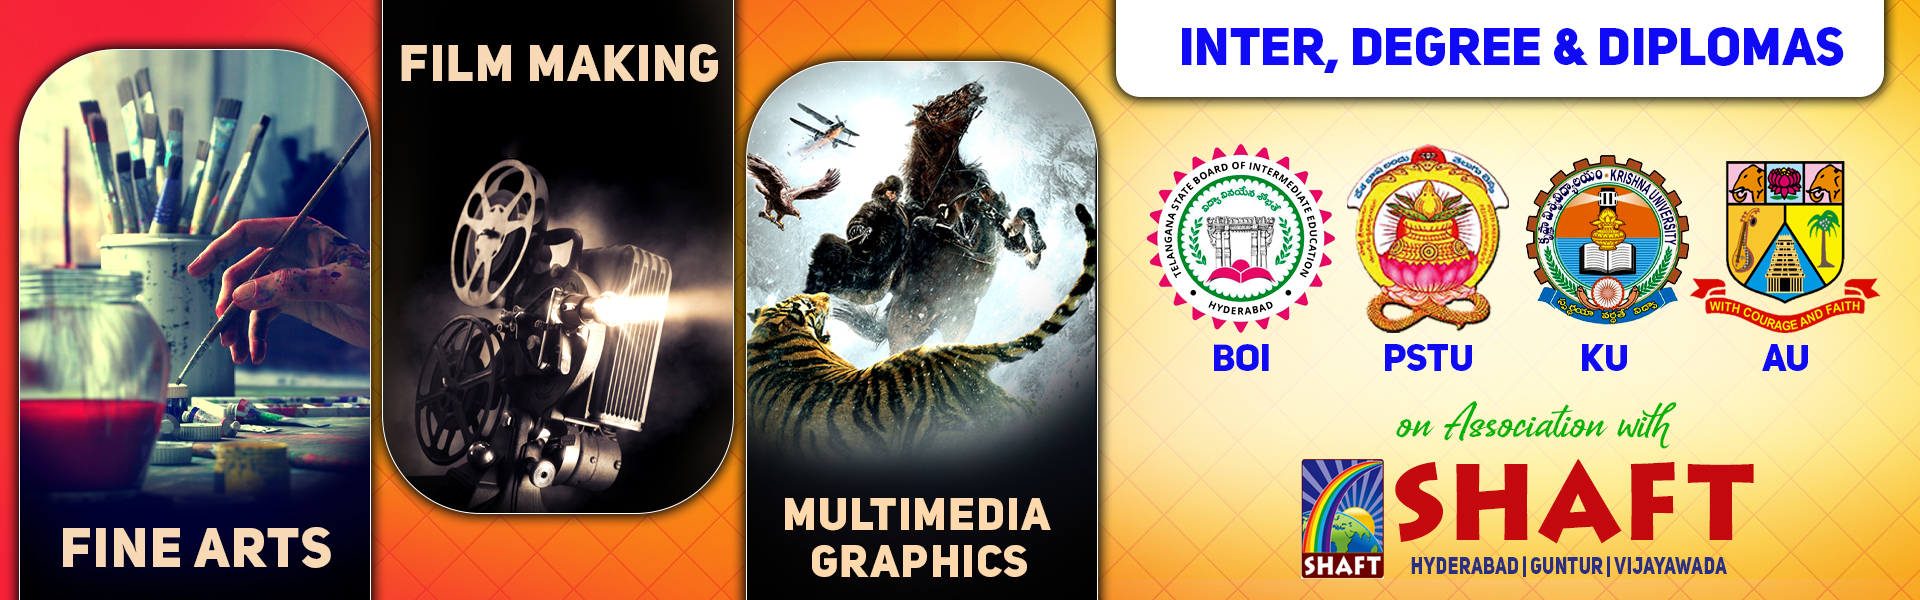 100% Placement Guarantee on Agreement | Vfx and Animation Courses